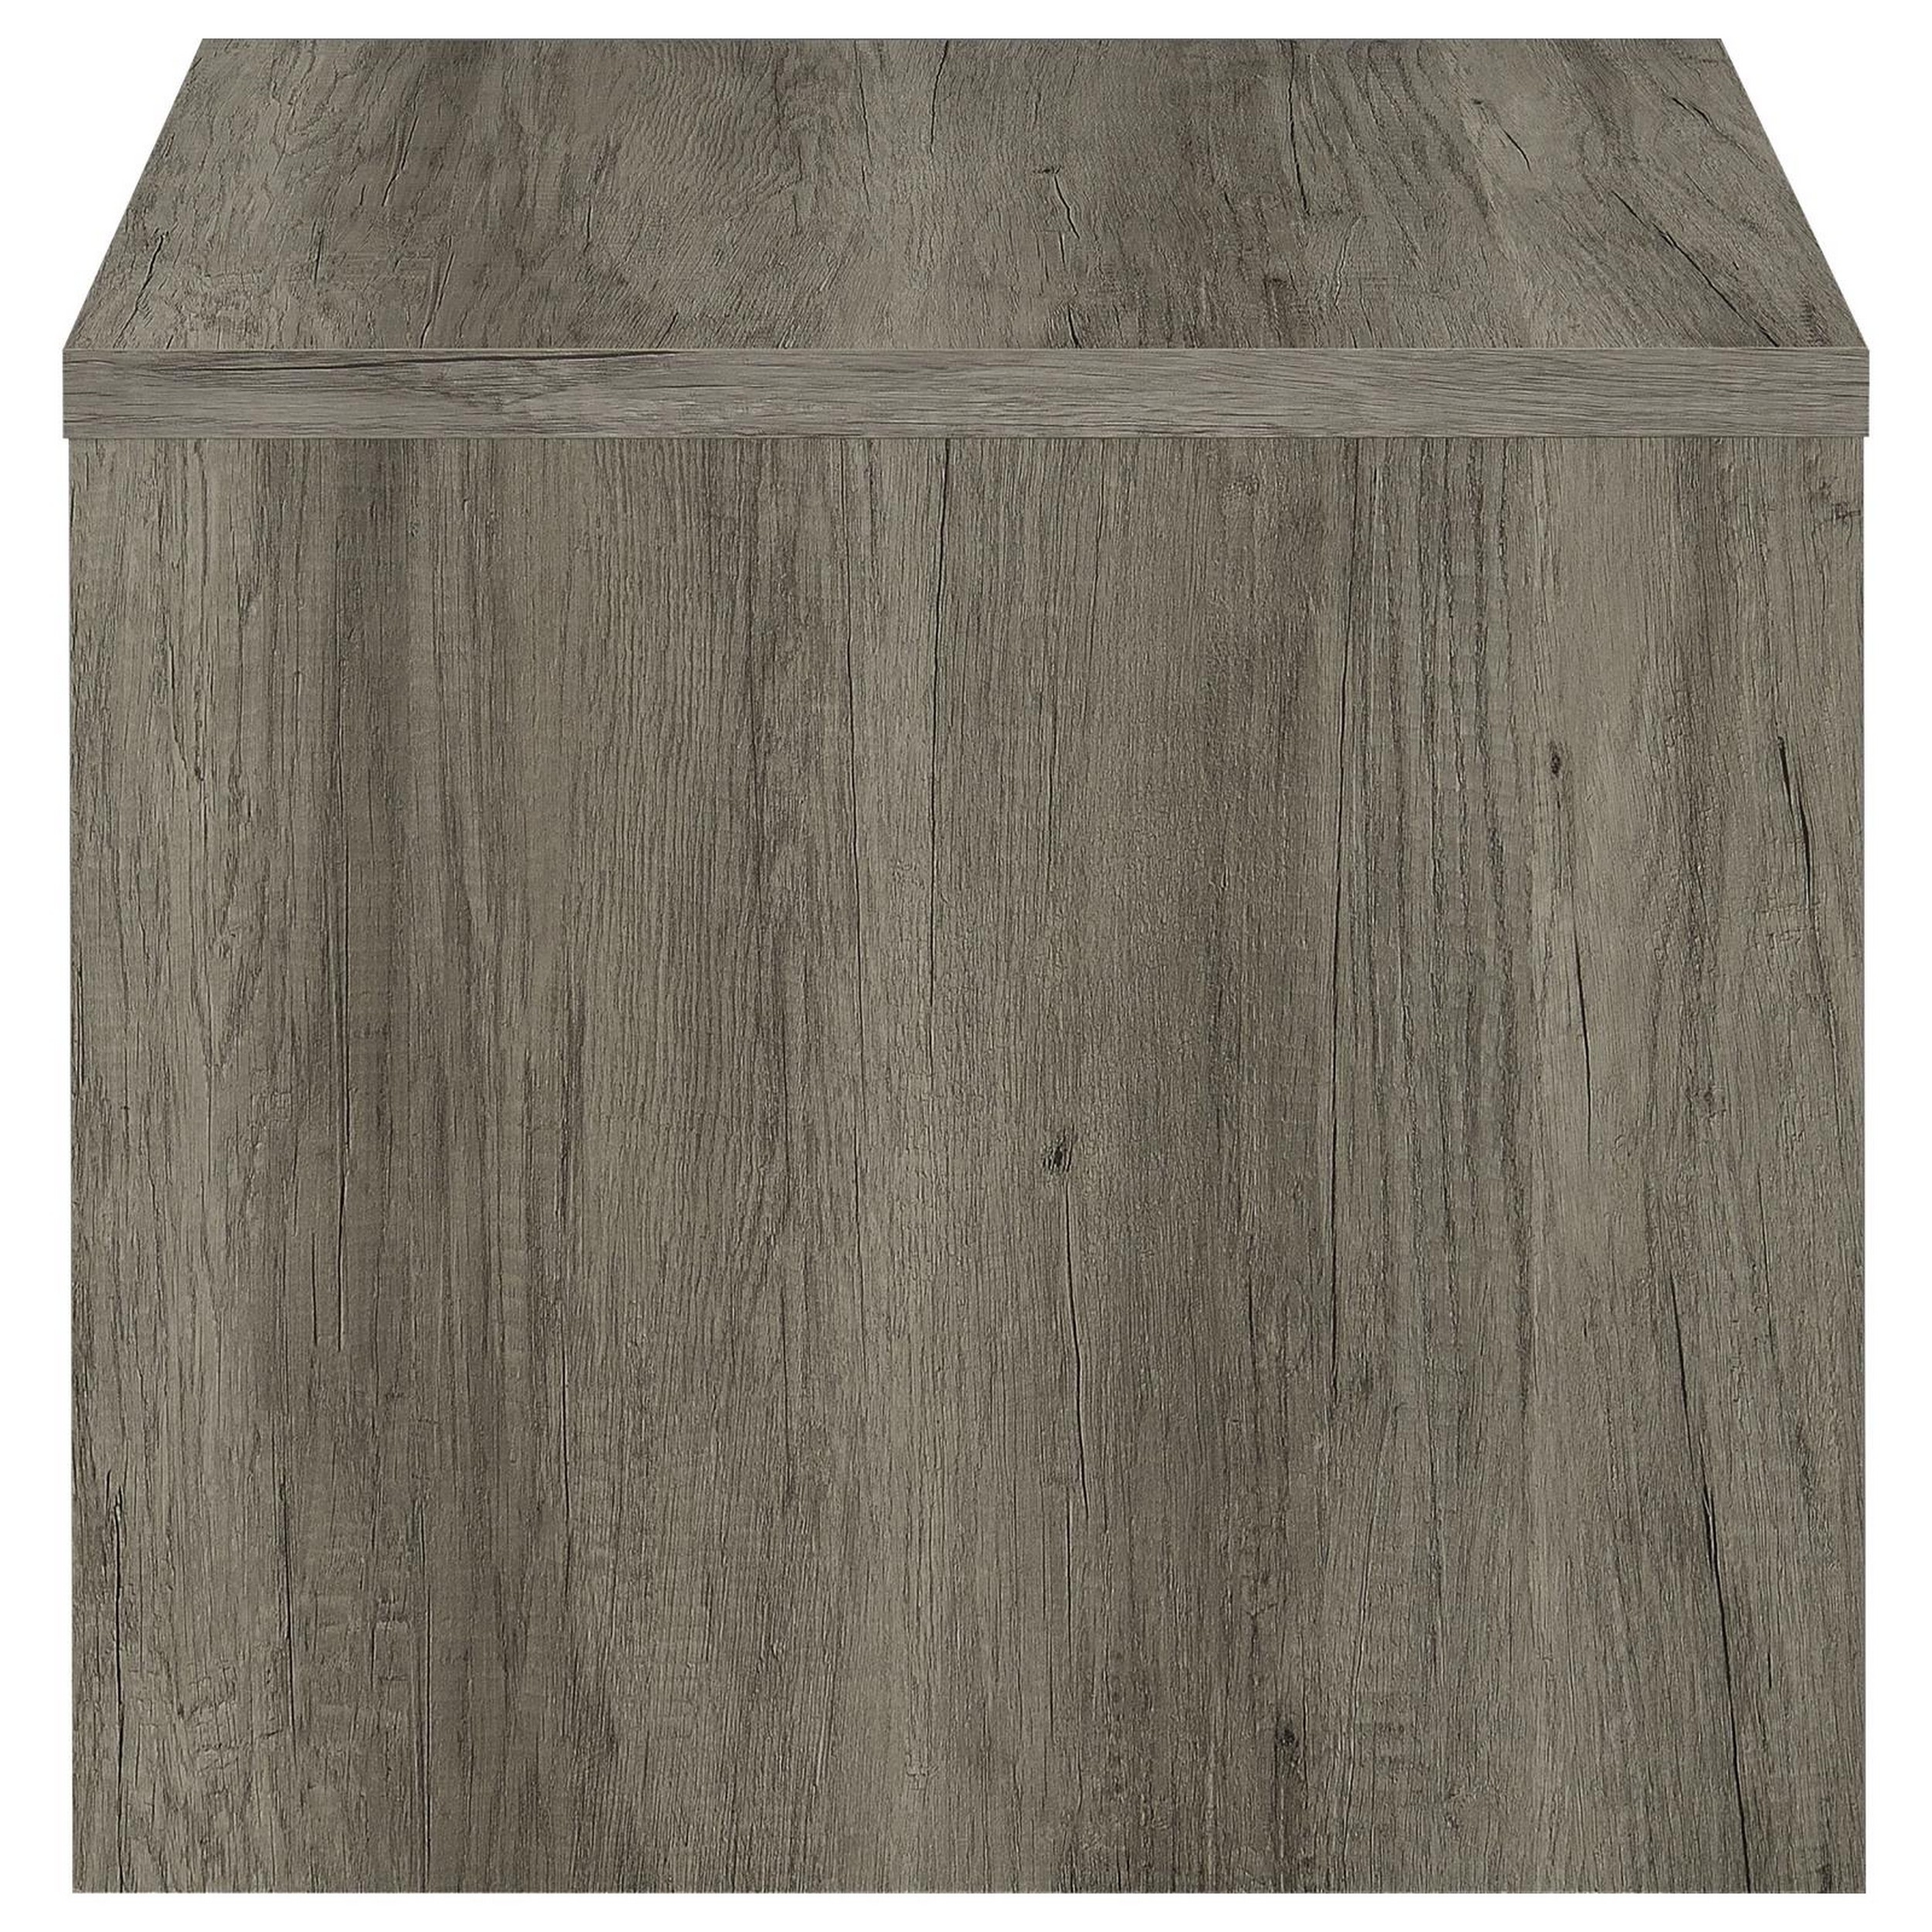 Lix 24 Inch Square End Table With 1 Drawer, Rustic Weathered Gray Finish -Saltoro Sherpi